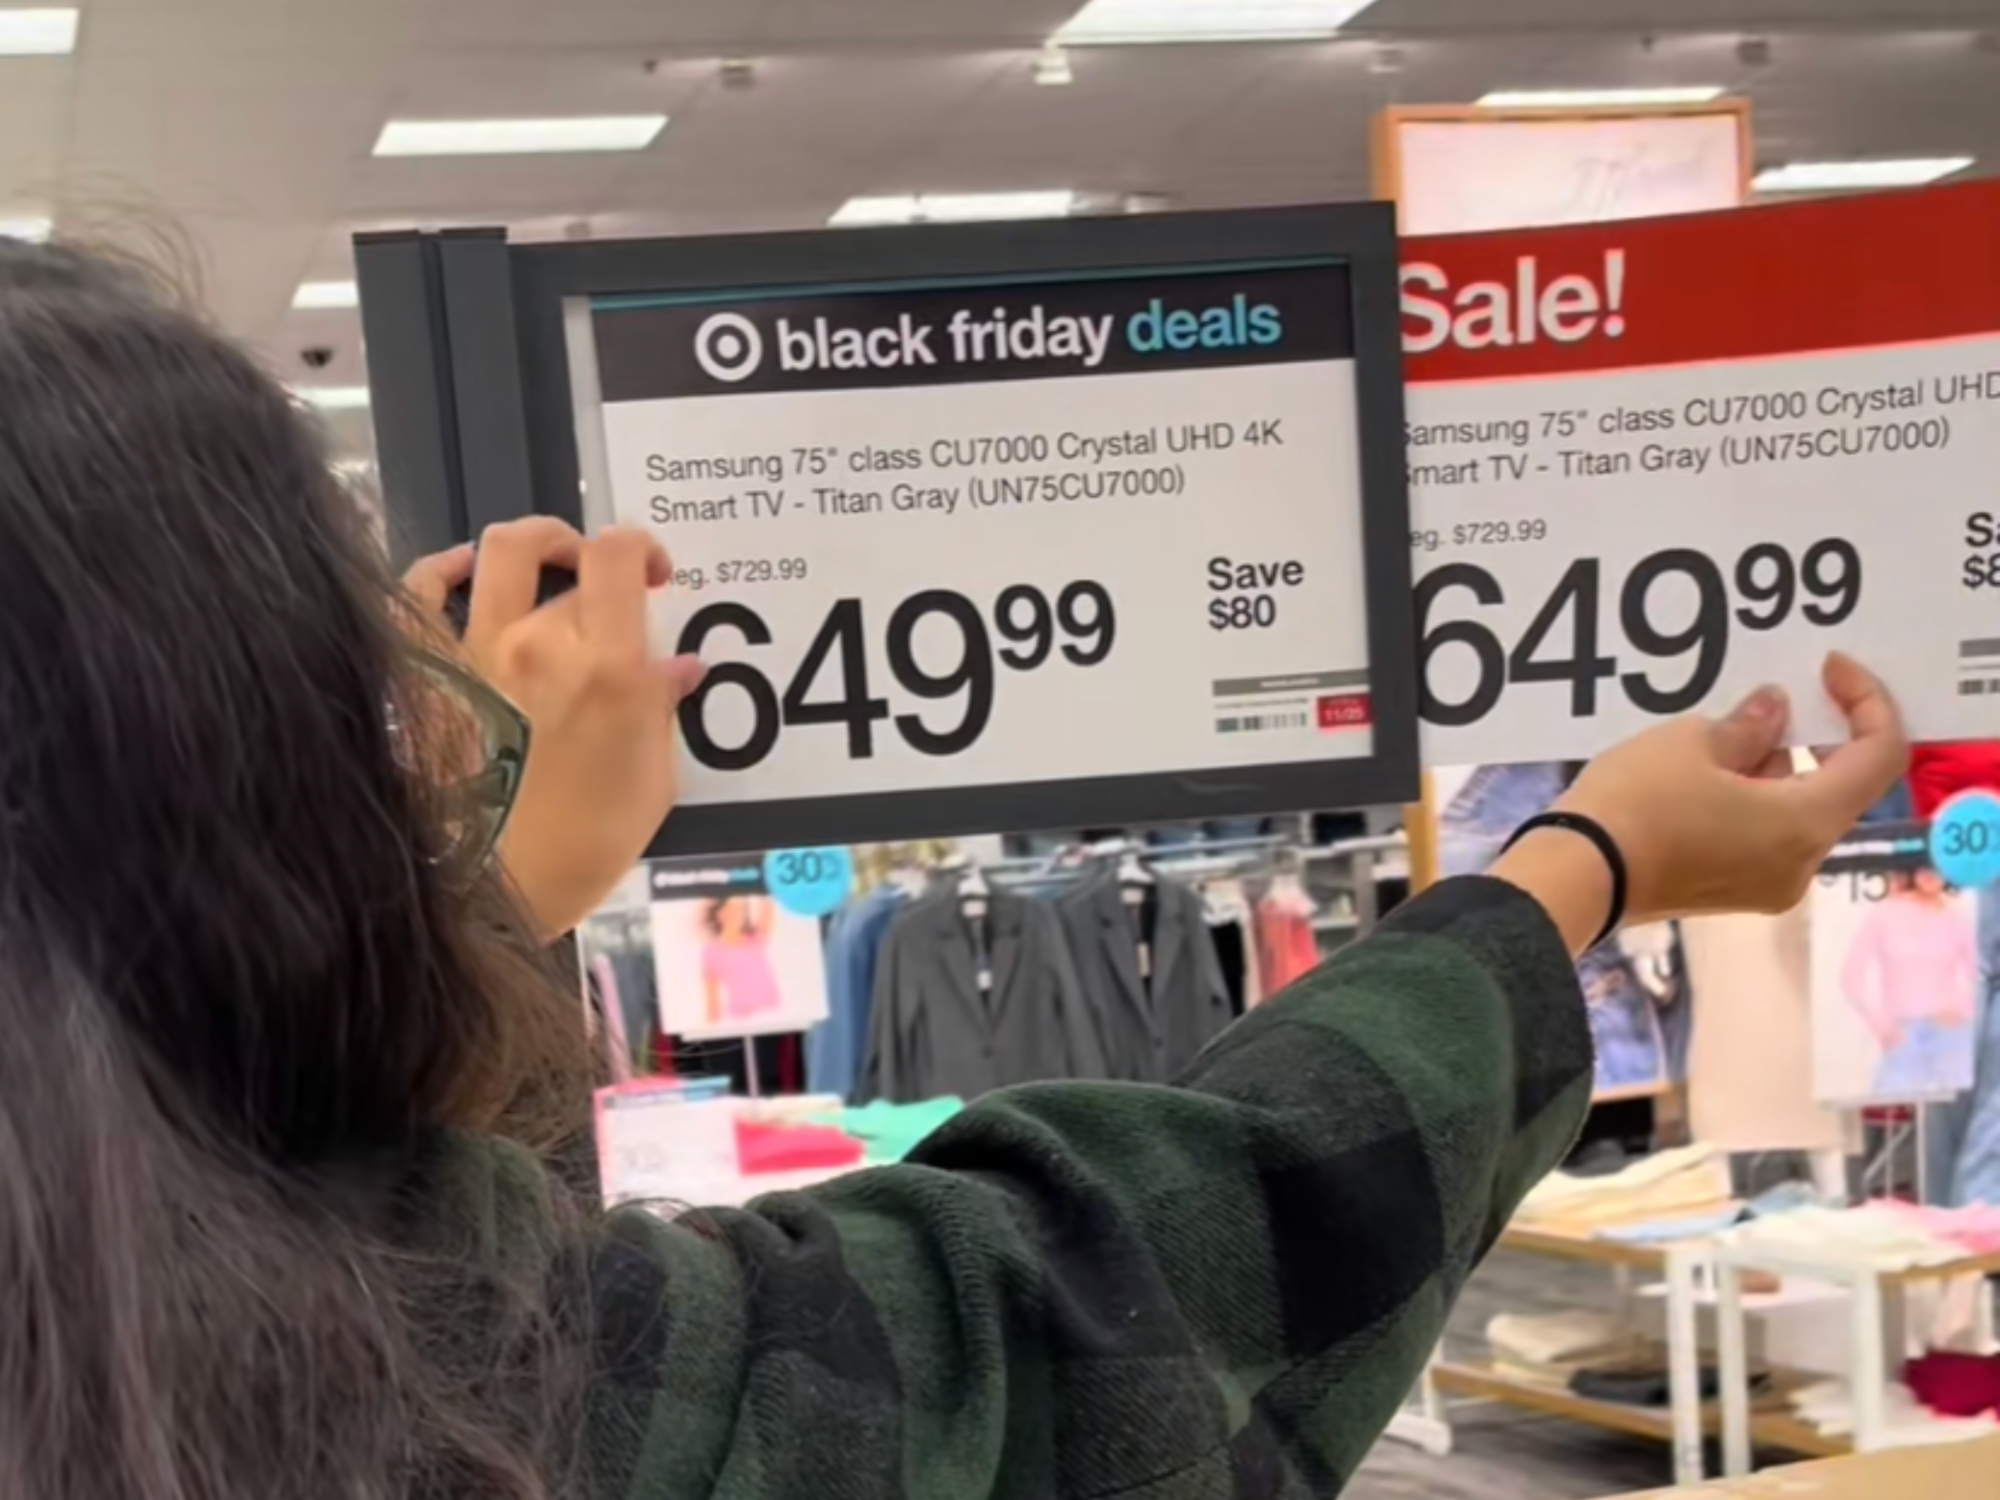 Viral TikTok on Target's Black Friday TV 'Deal' Shows Shoppers Are